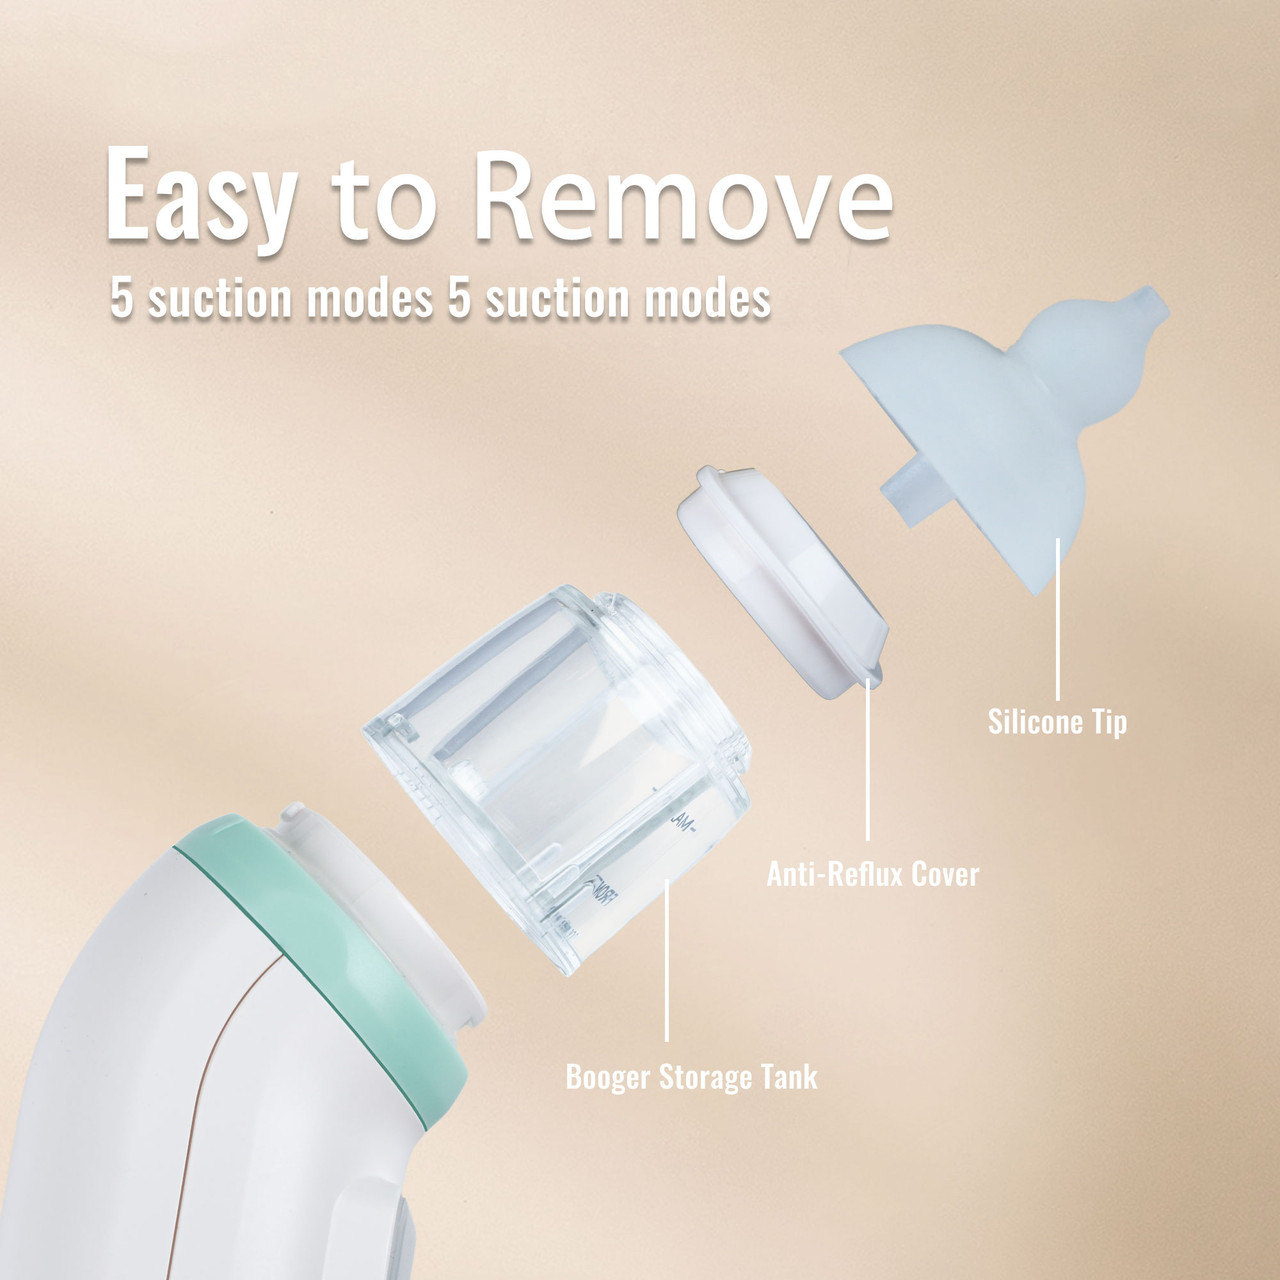  FIZANU Electric Nasal Aspirator for Baby, 3 Levels of